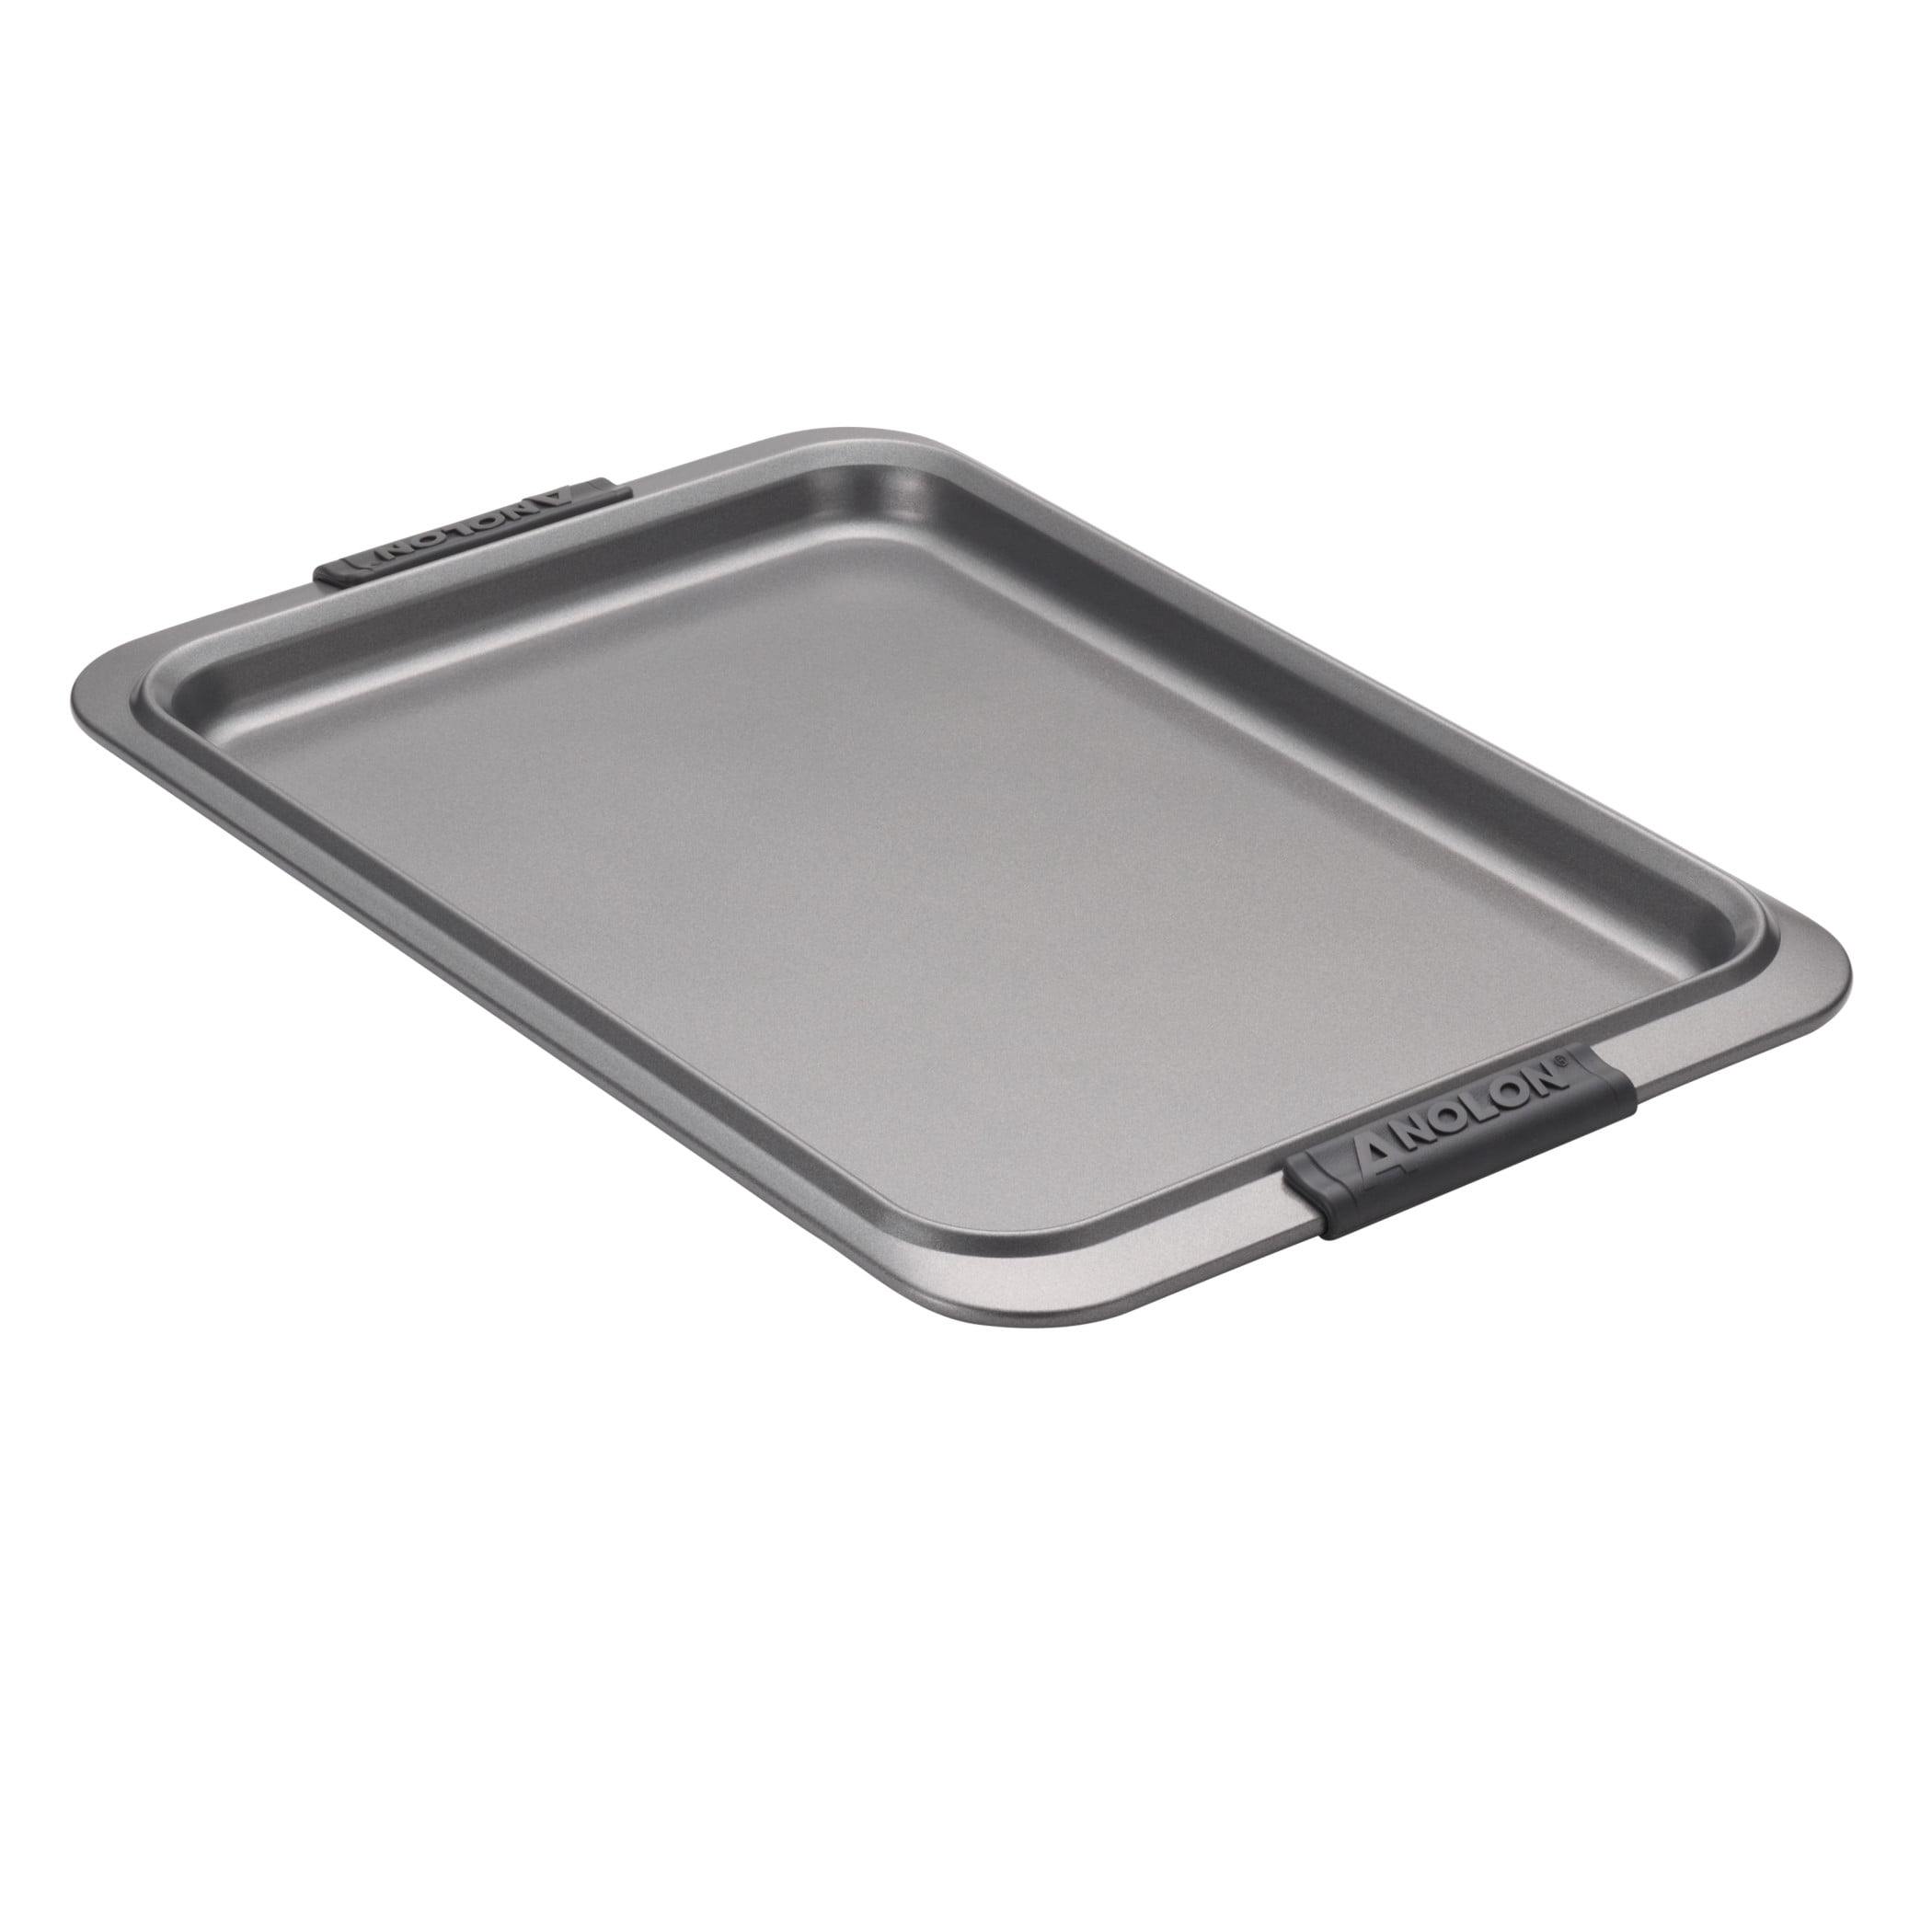 Nordic Ware Freshly Baked 11"x17" Cookie Sheet Pan with Copper Clean Nonstick 